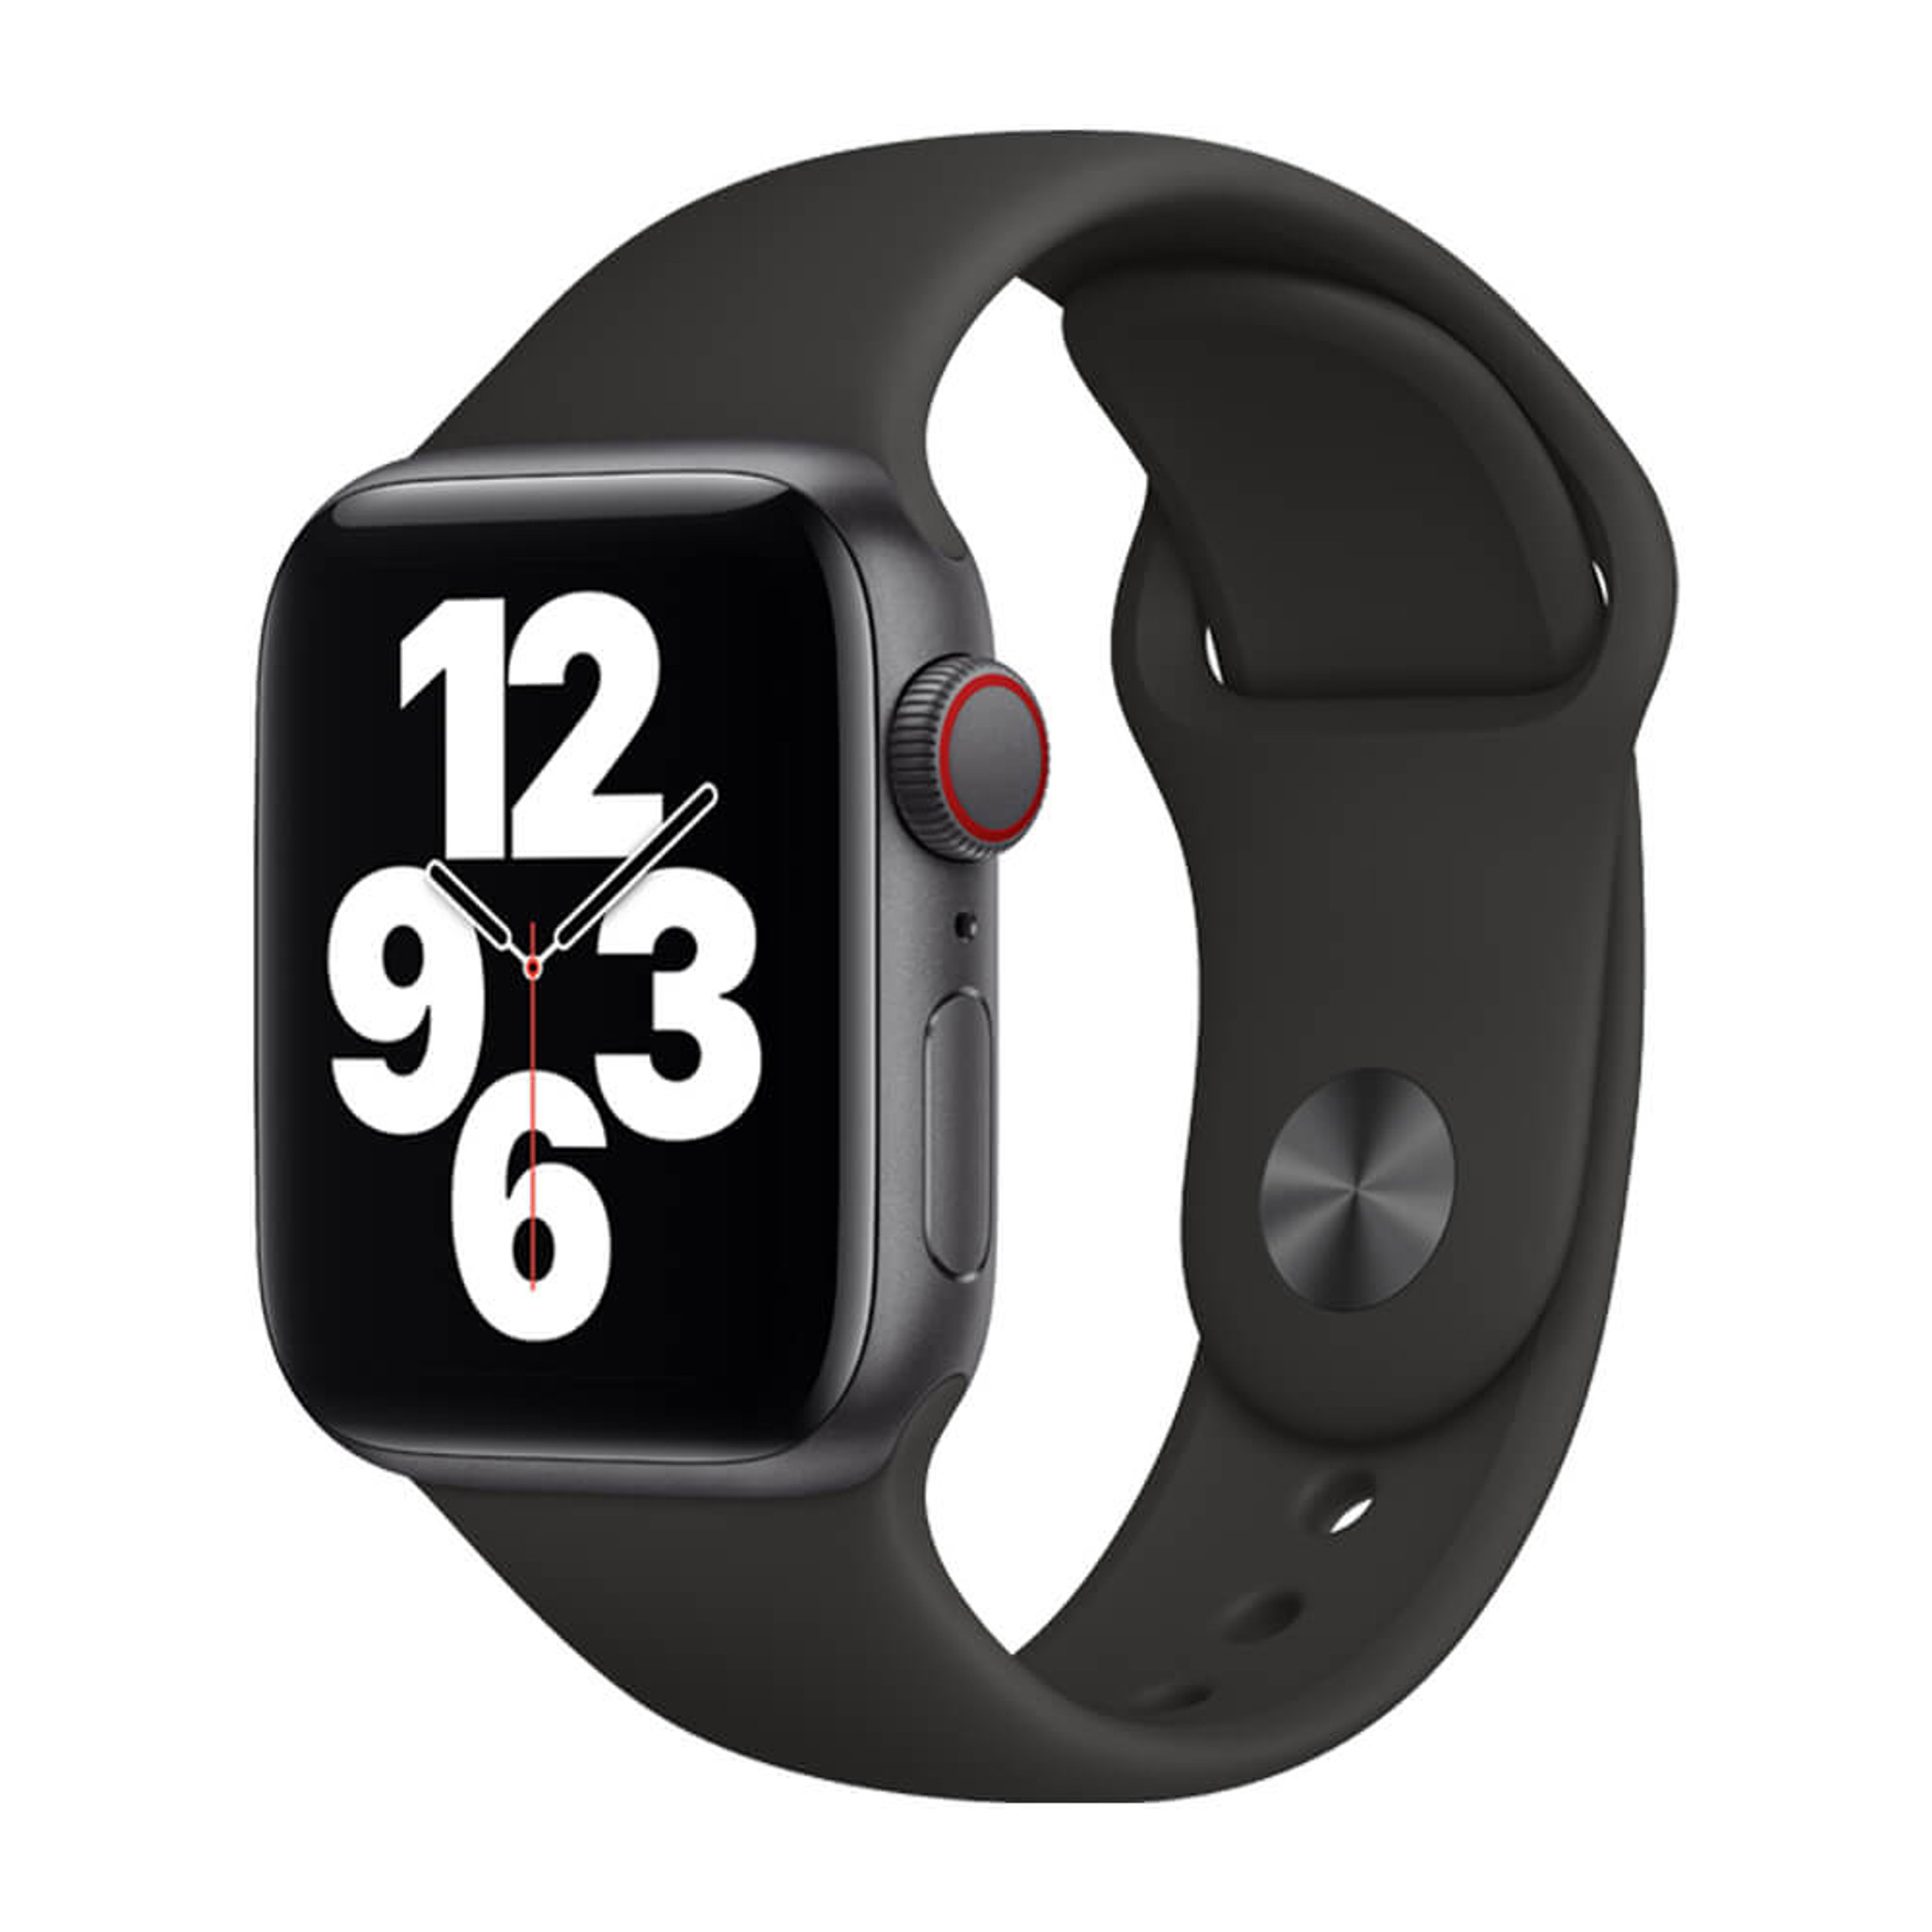 Apple Watch SE GPS + Cellular - 44mm - The Wireless Age (a Division of IM  Wireless Communications Ltd.)